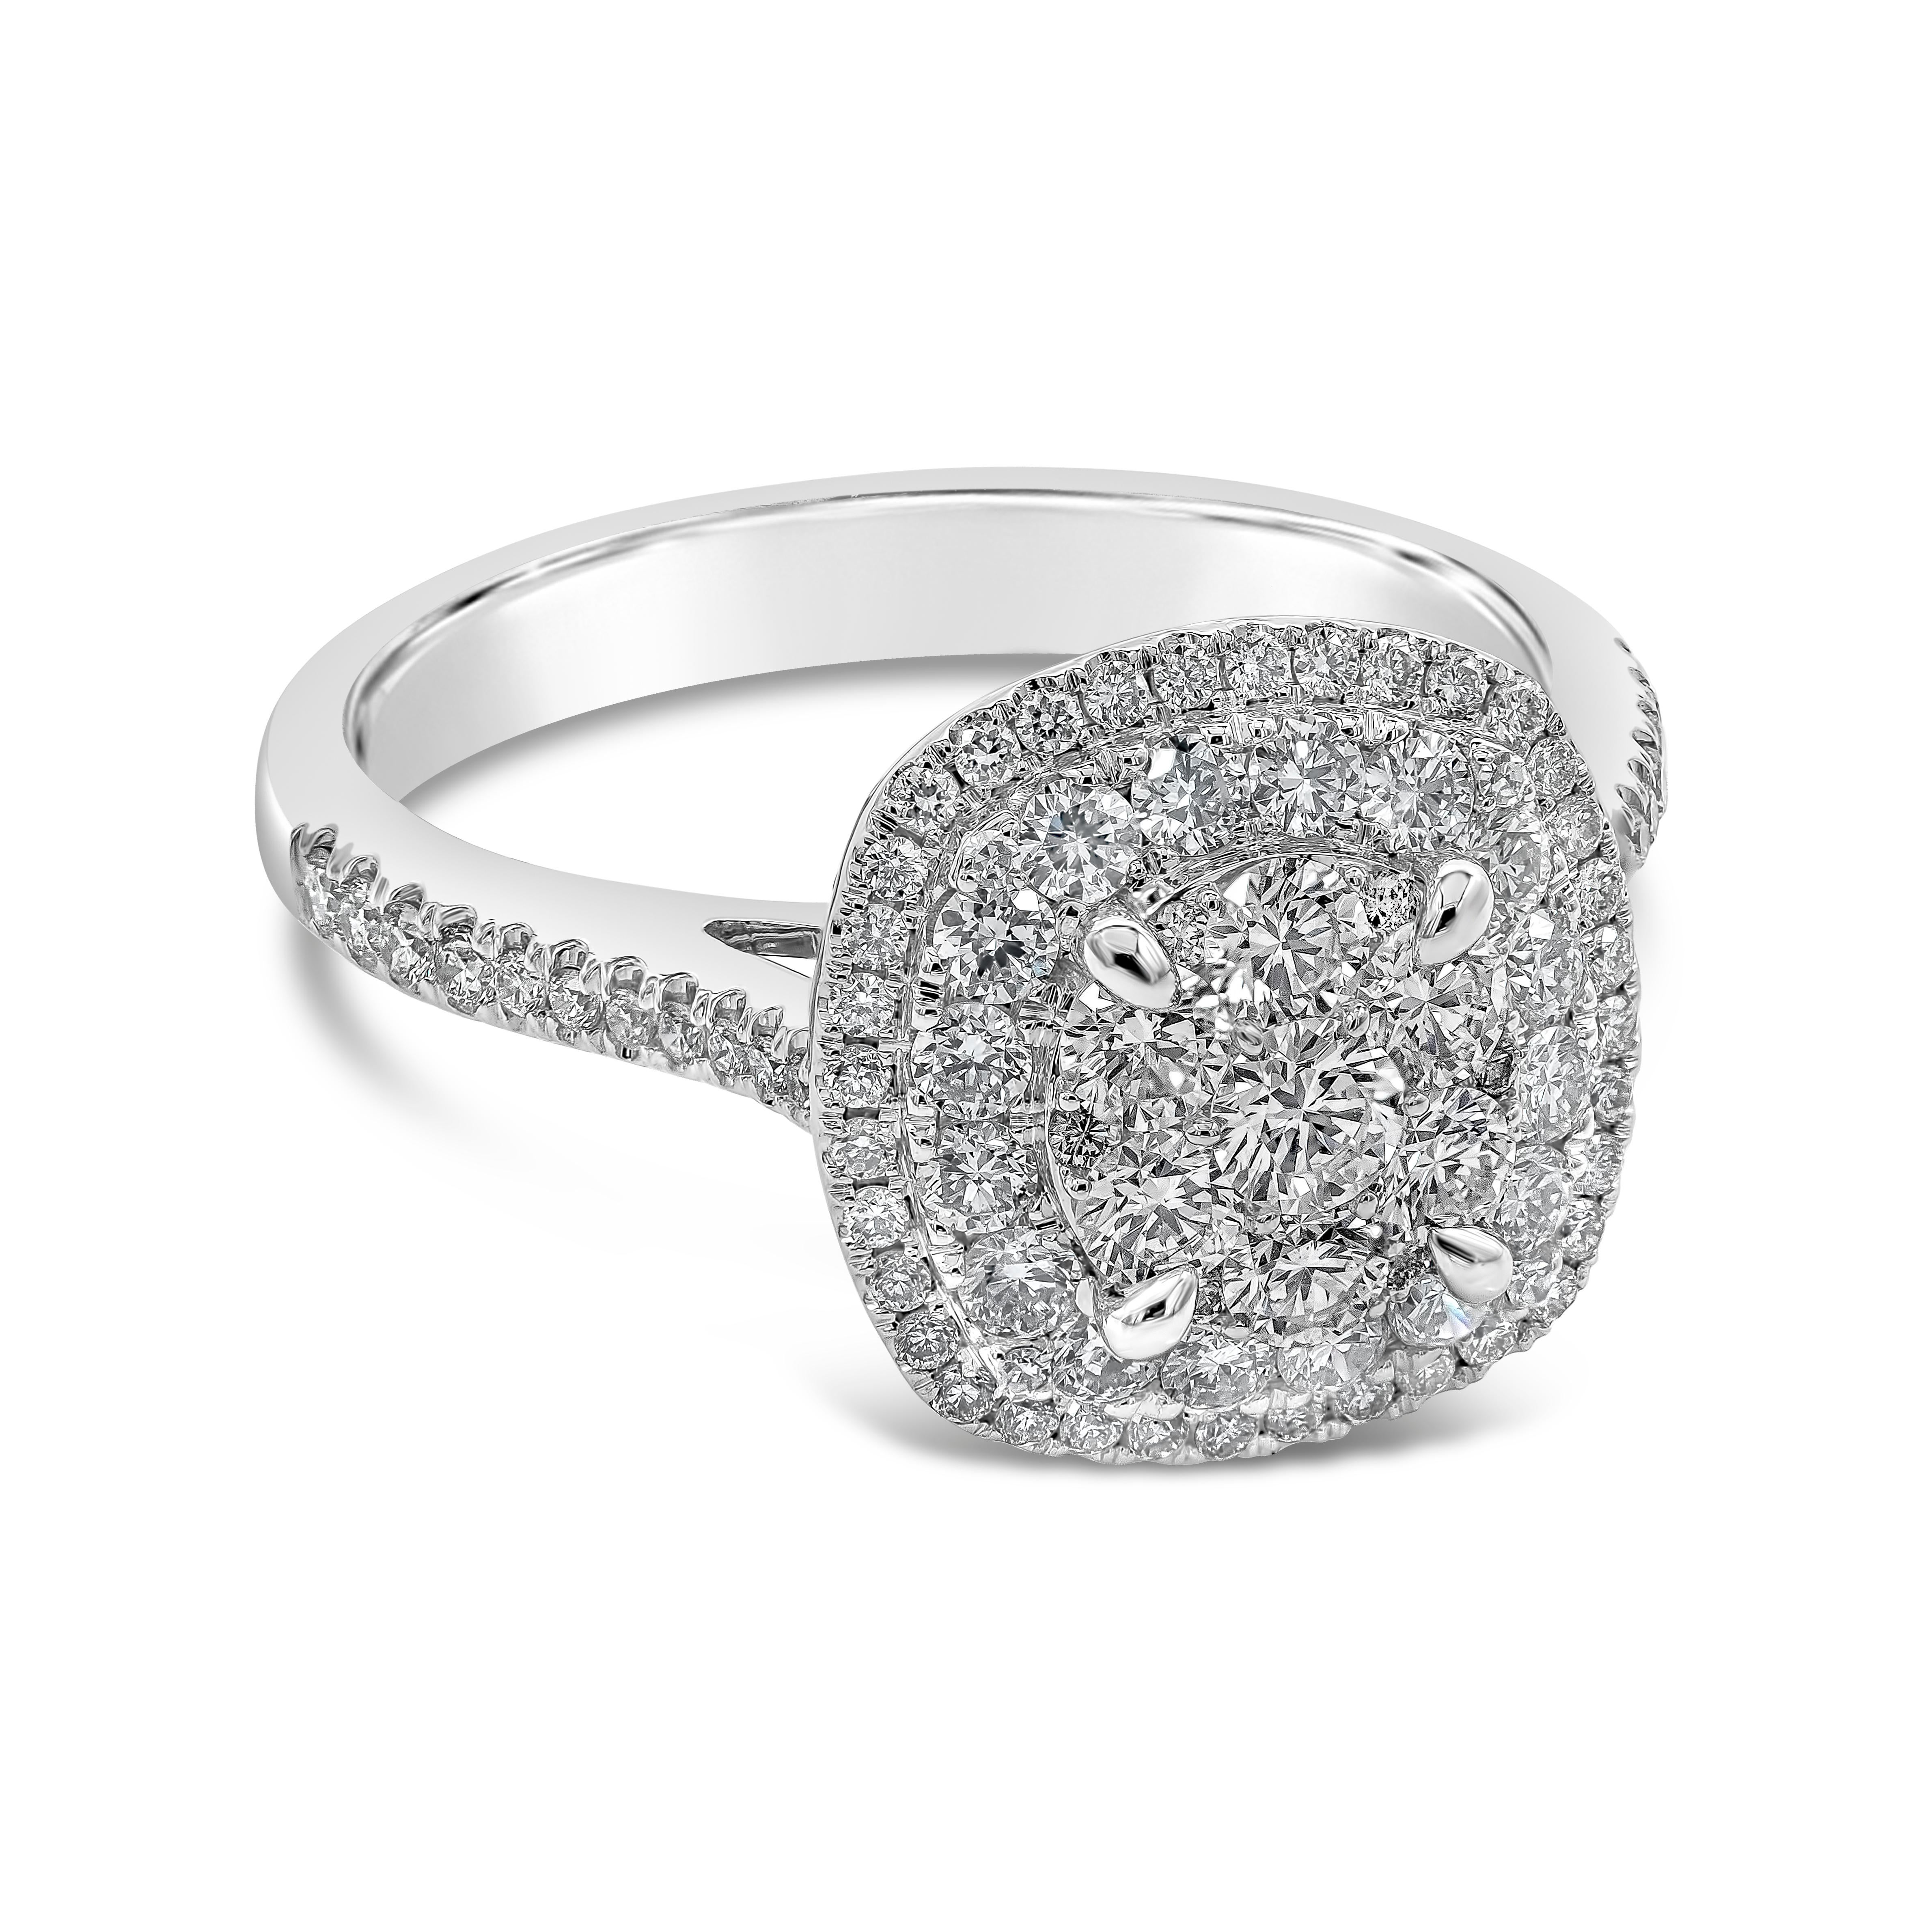 A budget-friendly engagement ring showcasing a cluster of round brilliant diamonds, set in a halo design setting made in 14k white gold. Diamonds weigh 0.94 carats and are approximately G-H color, VS-SI clarity. 

Style available in different price